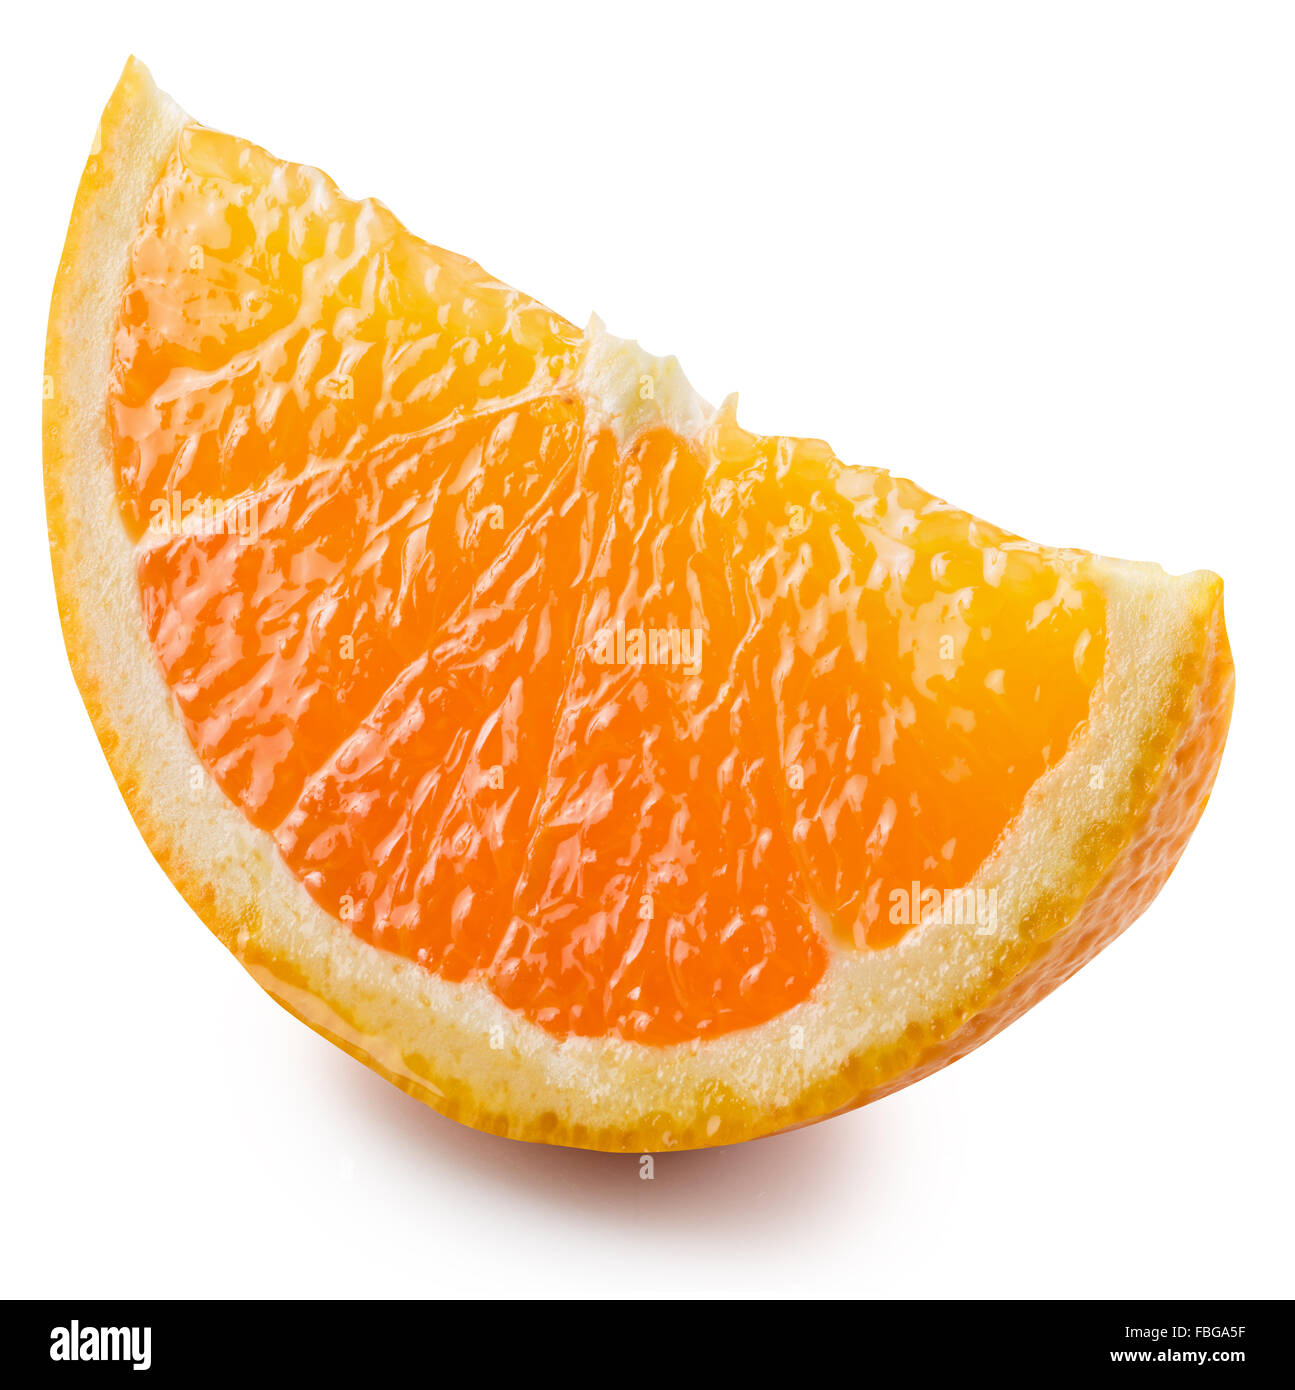 Segment of an orange fruit. File contains clipping paths. Stock Photo